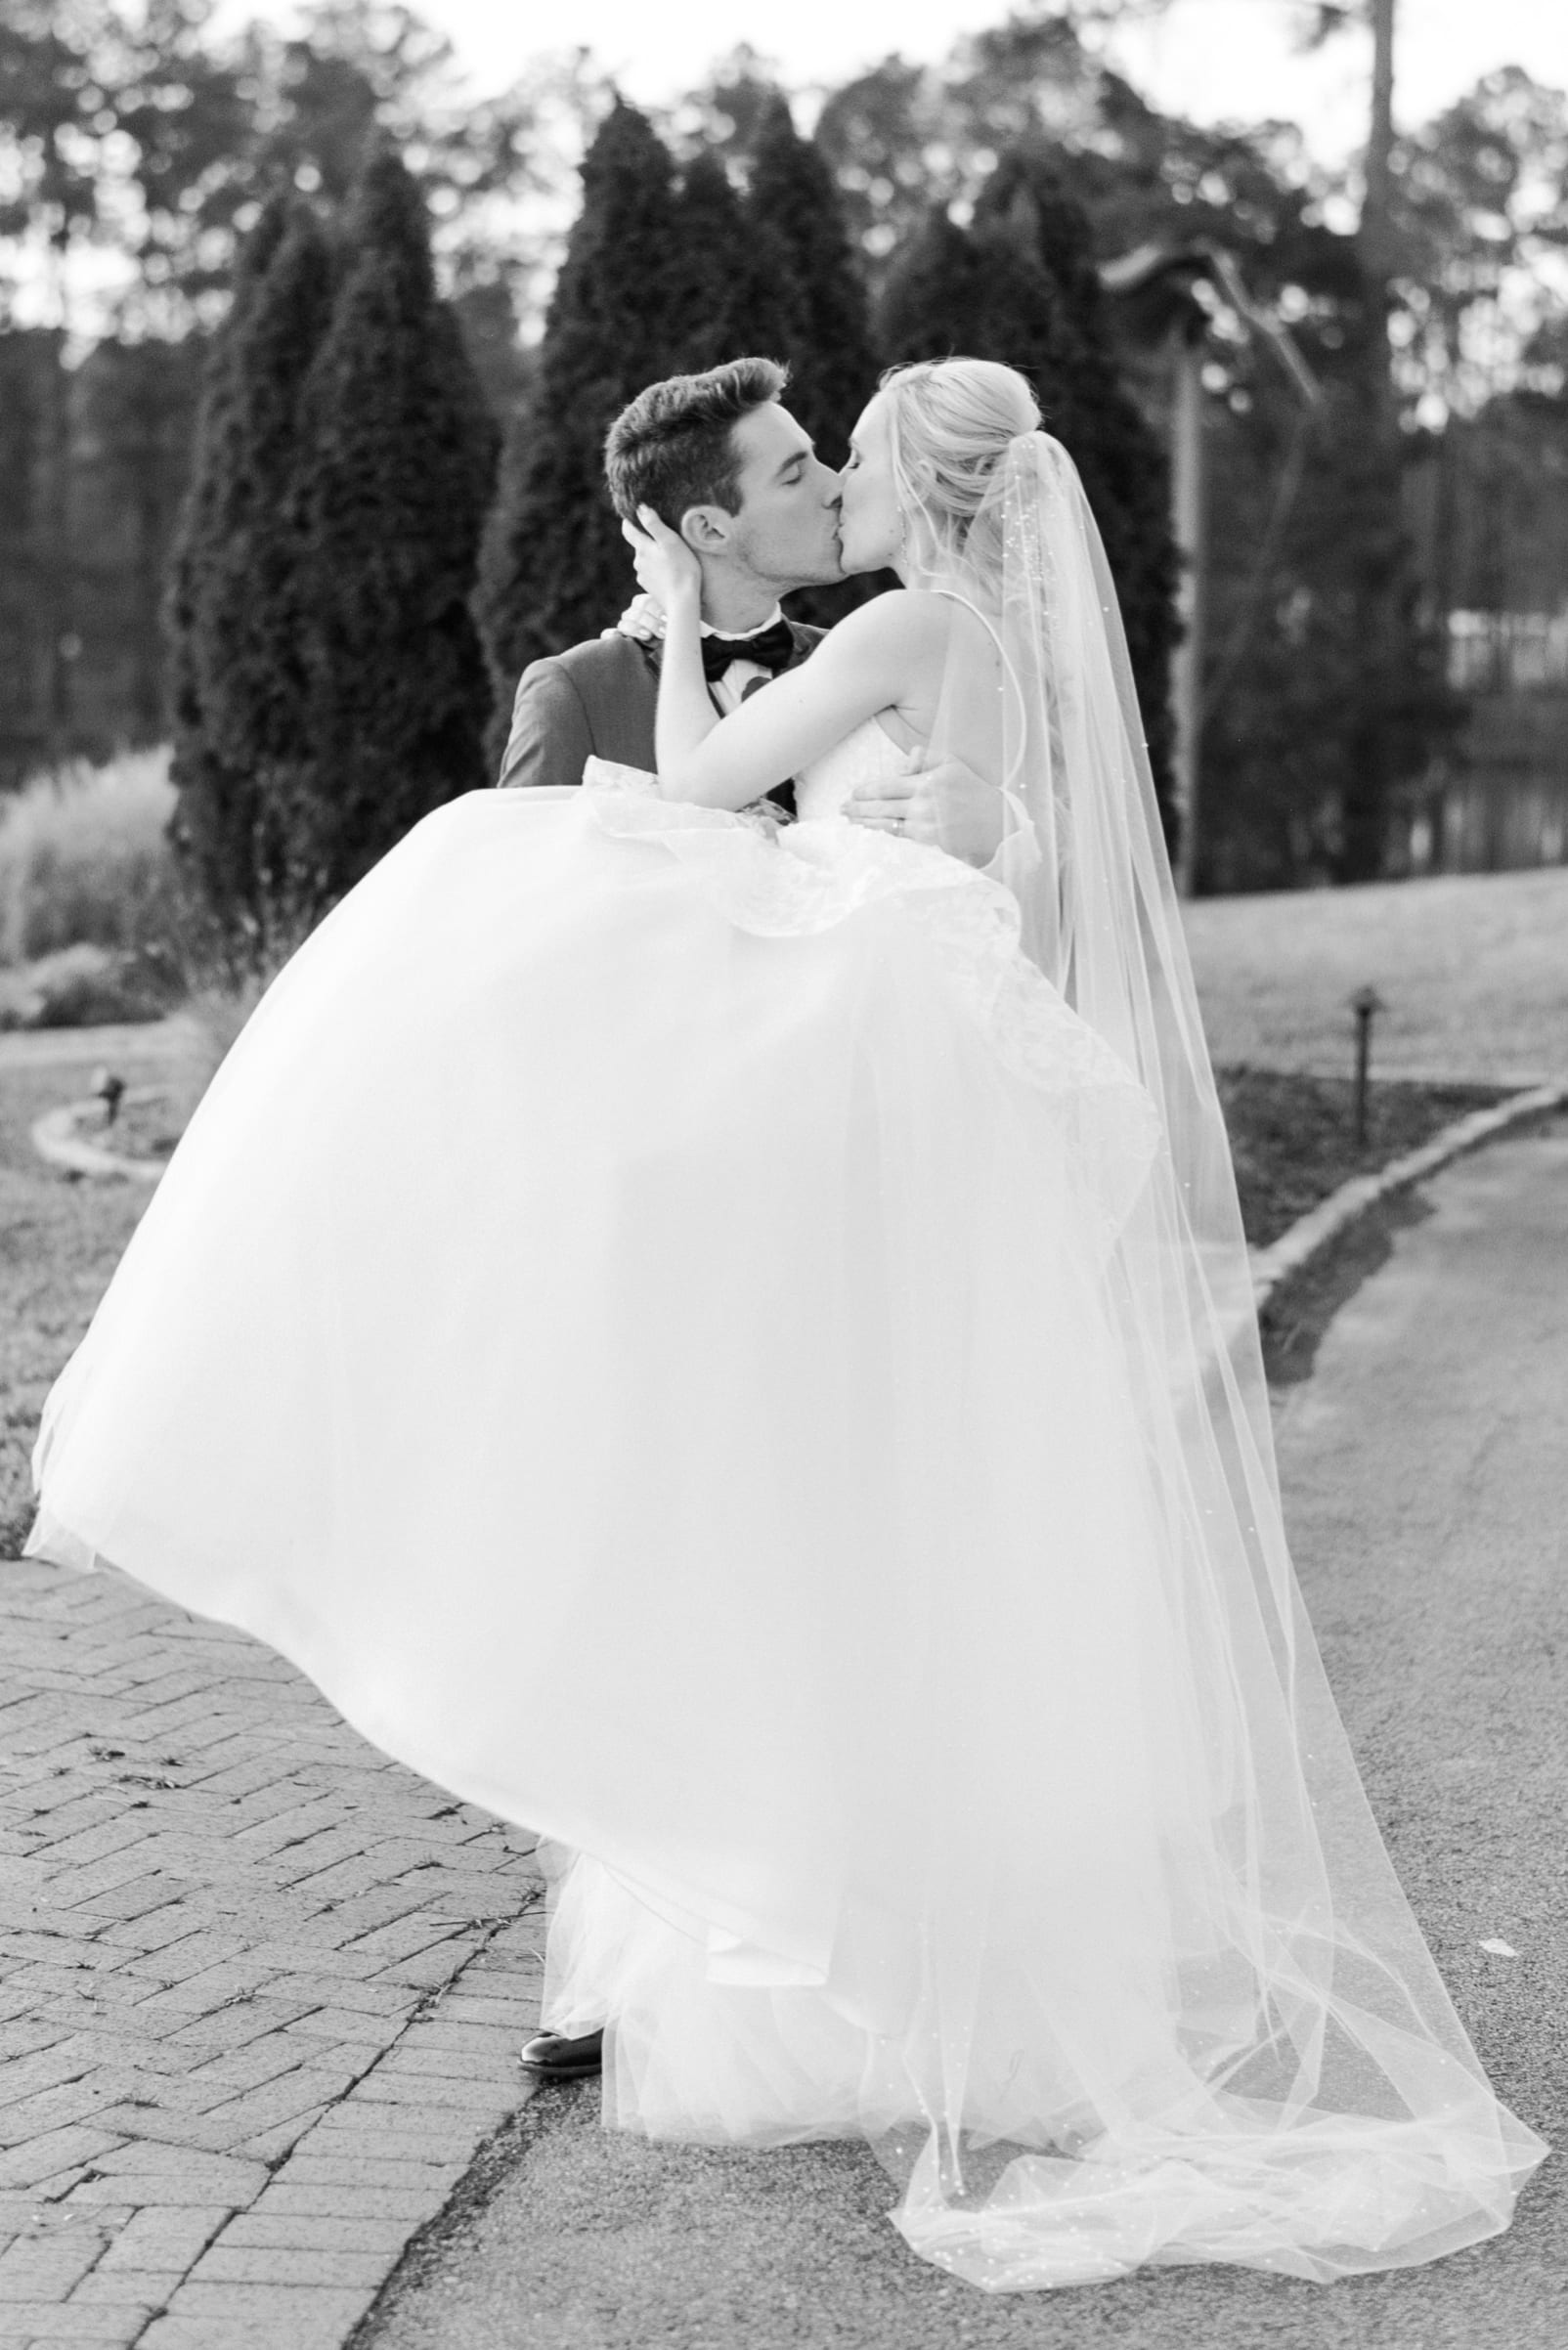 Raleigh groom holding his bride while they kiss in a black and white portrait photo